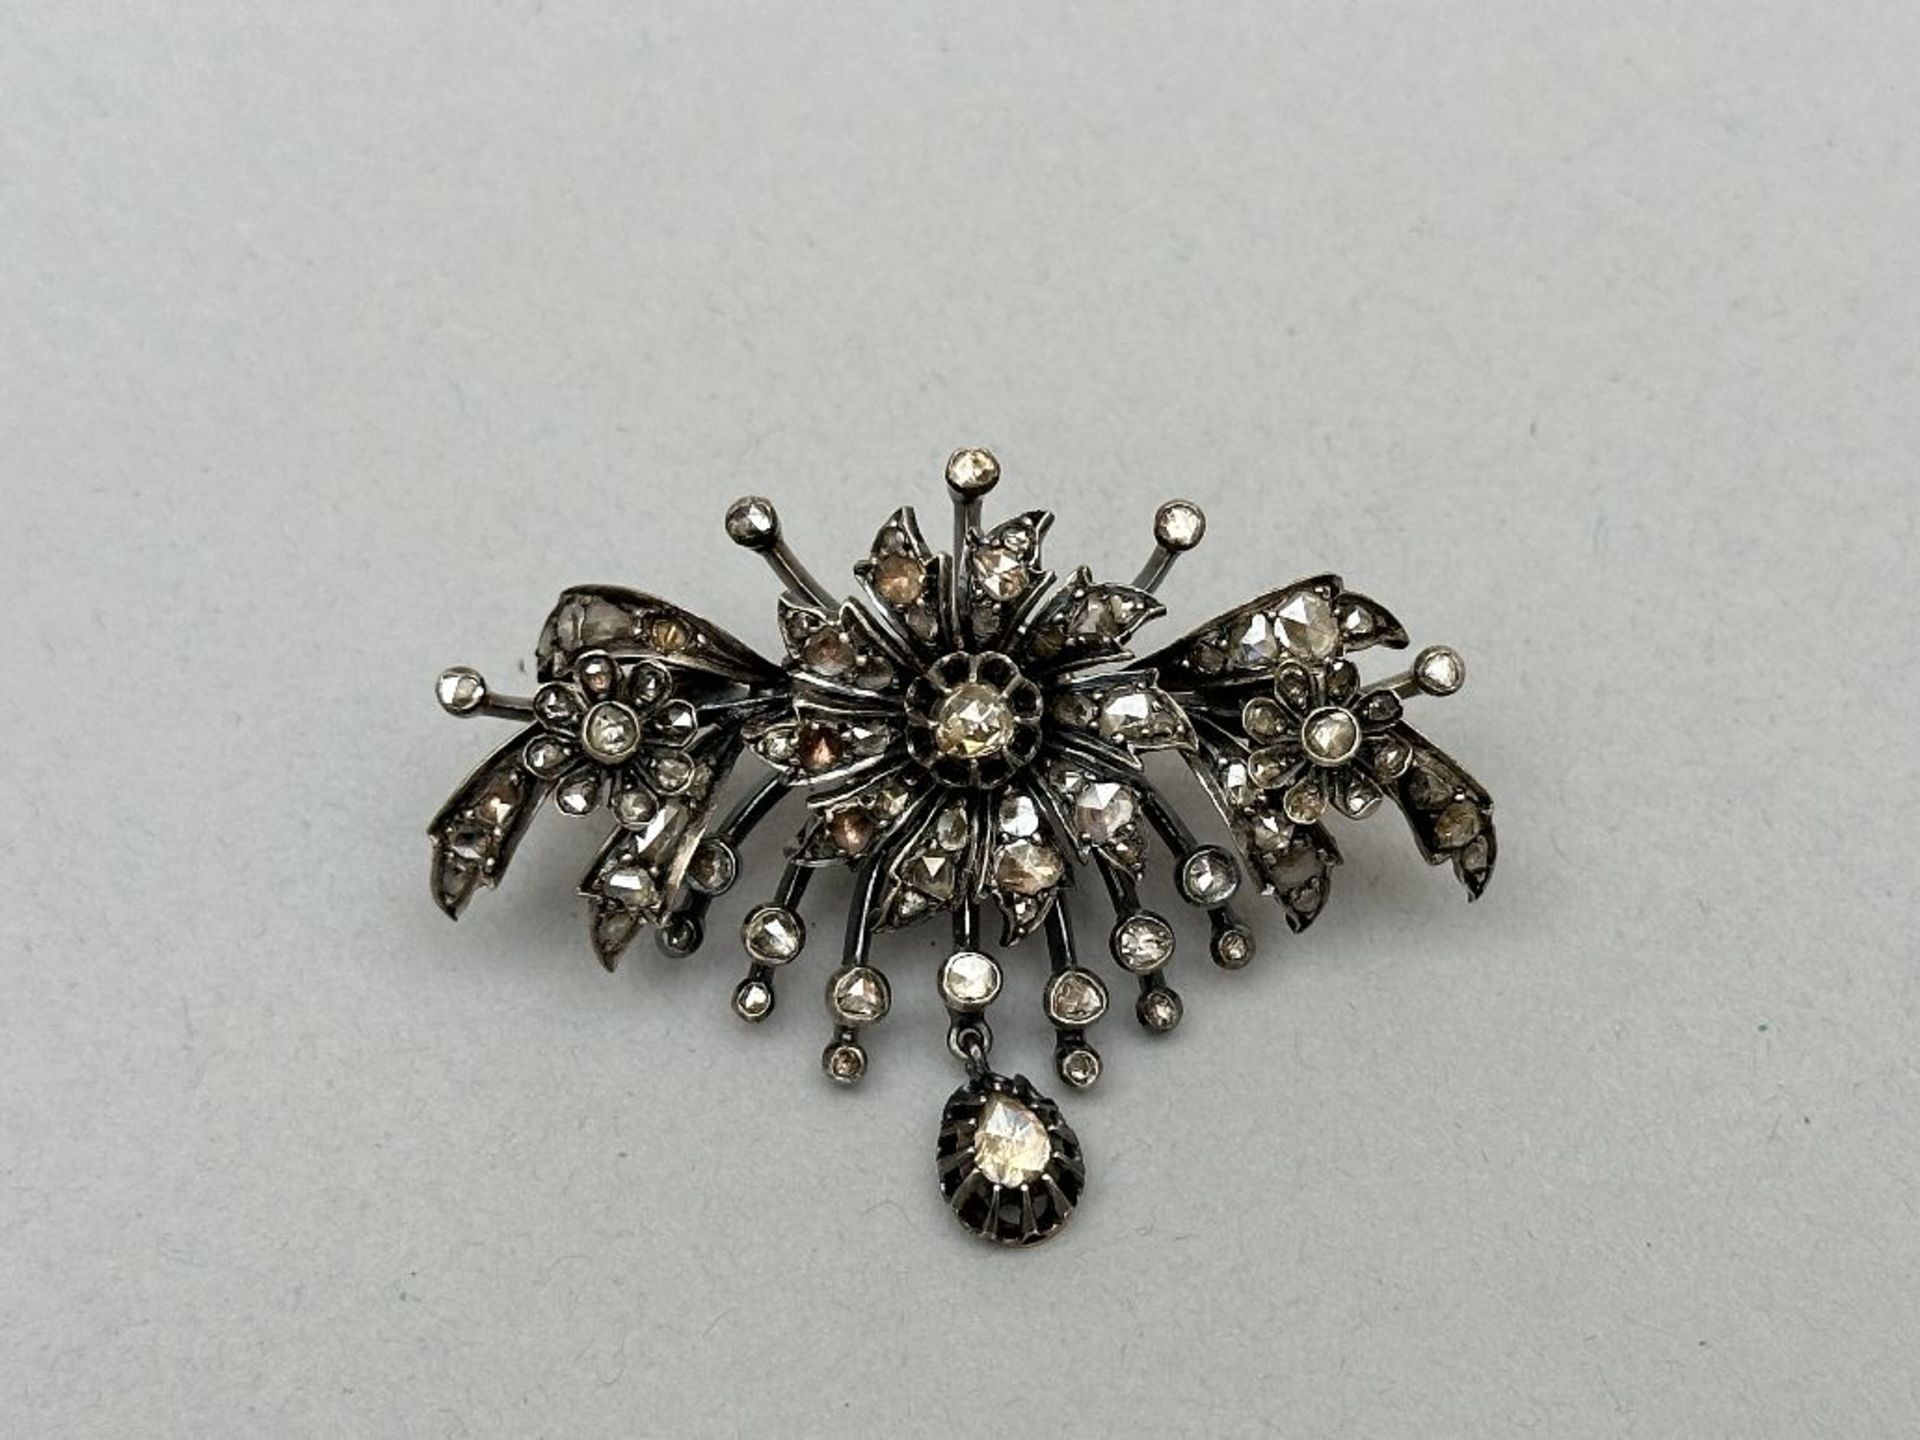 Flemish jewelry: flower brooch and pendant - Image 2 of 5